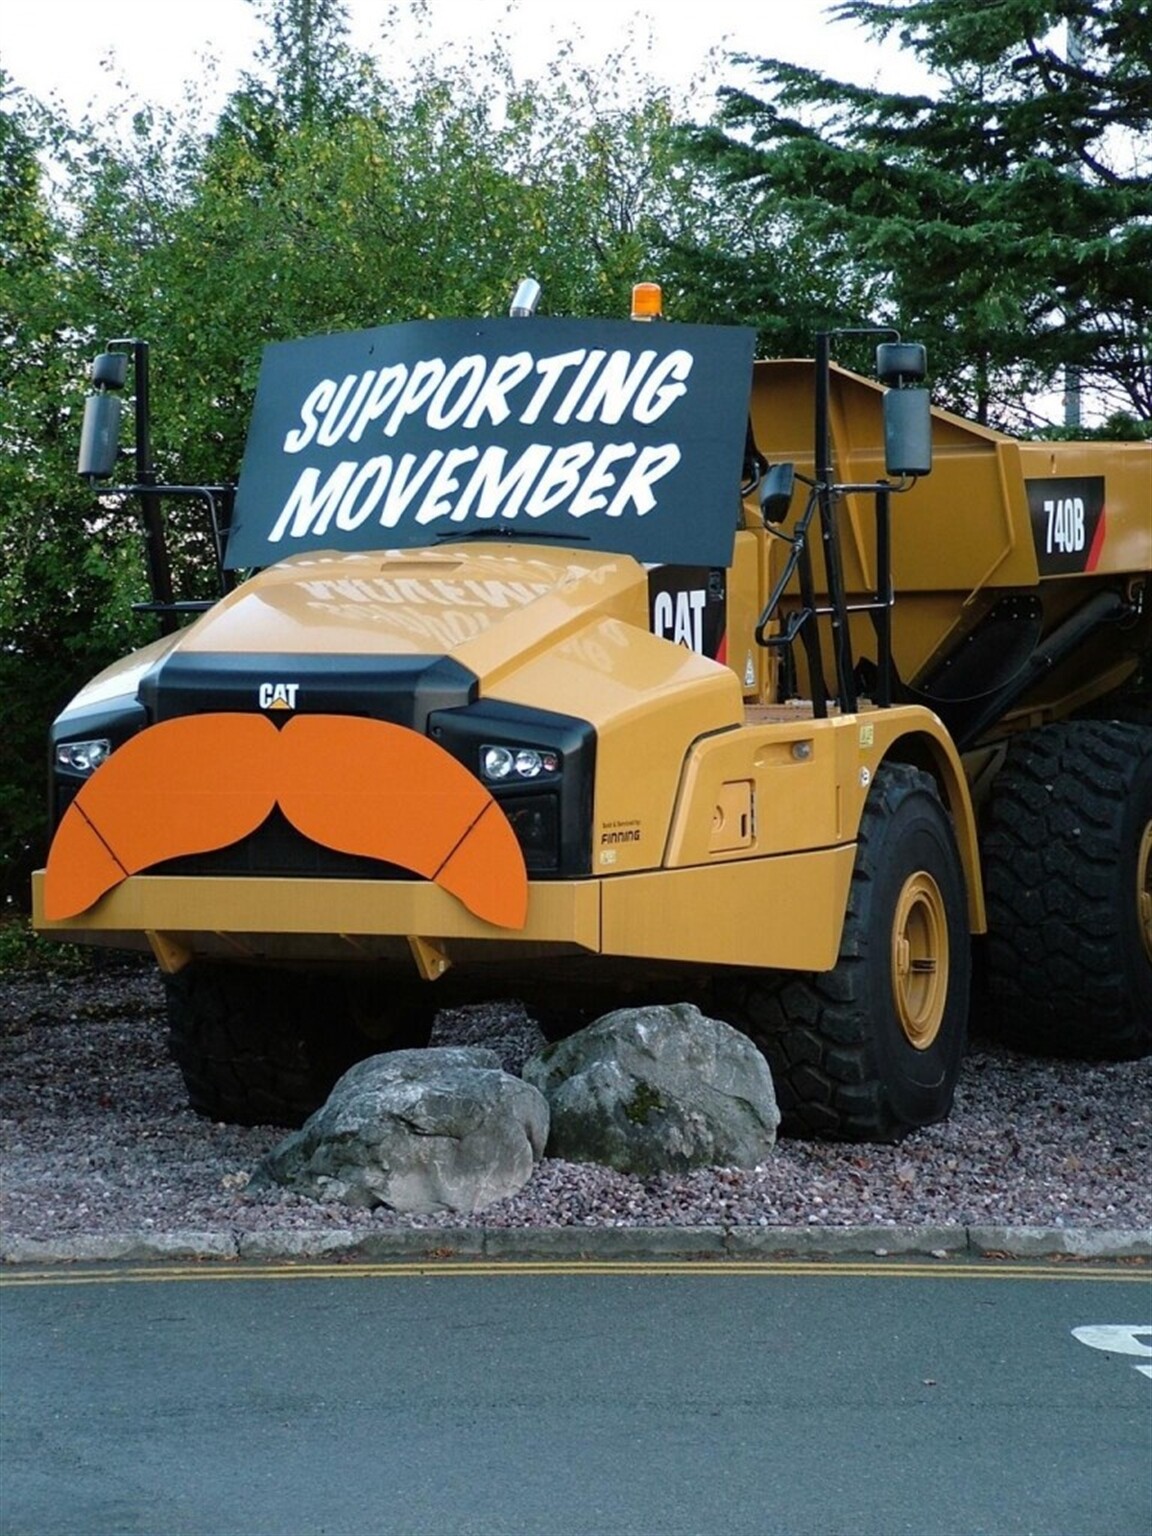 Finning Cat shows a stiff upper lip in support of Movember